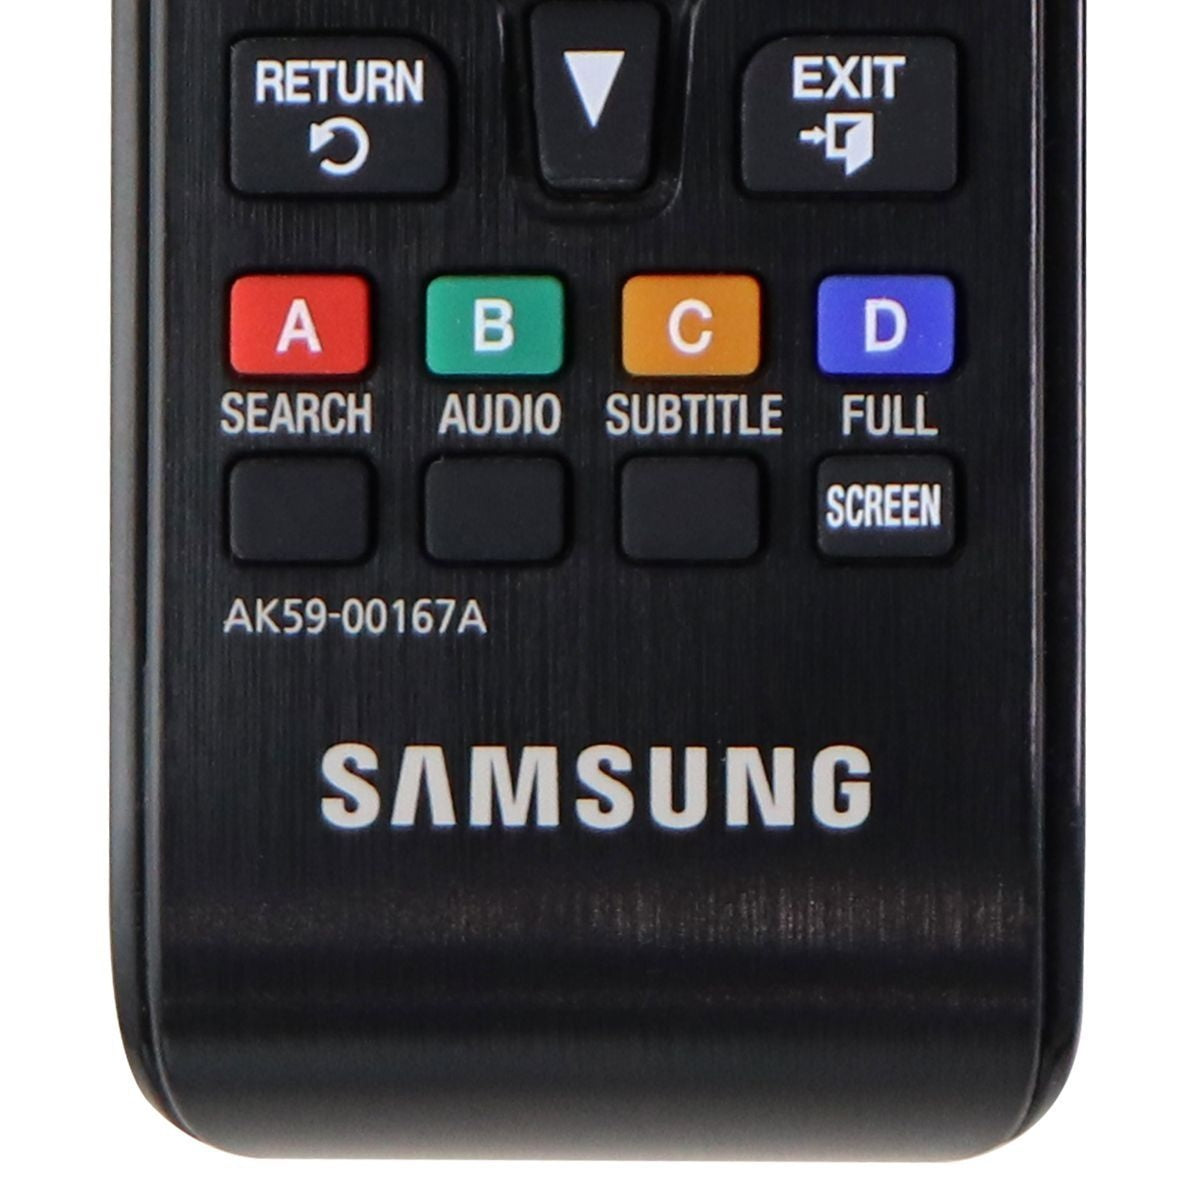 Samsung Remote (AK59-00167A) for Select Samsung Blu-Ray Players - Black TV, Video & Audio Accessories - Remote Controls Samsung    - Simple Cell Bulk Wholesale Pricing - USA Seller